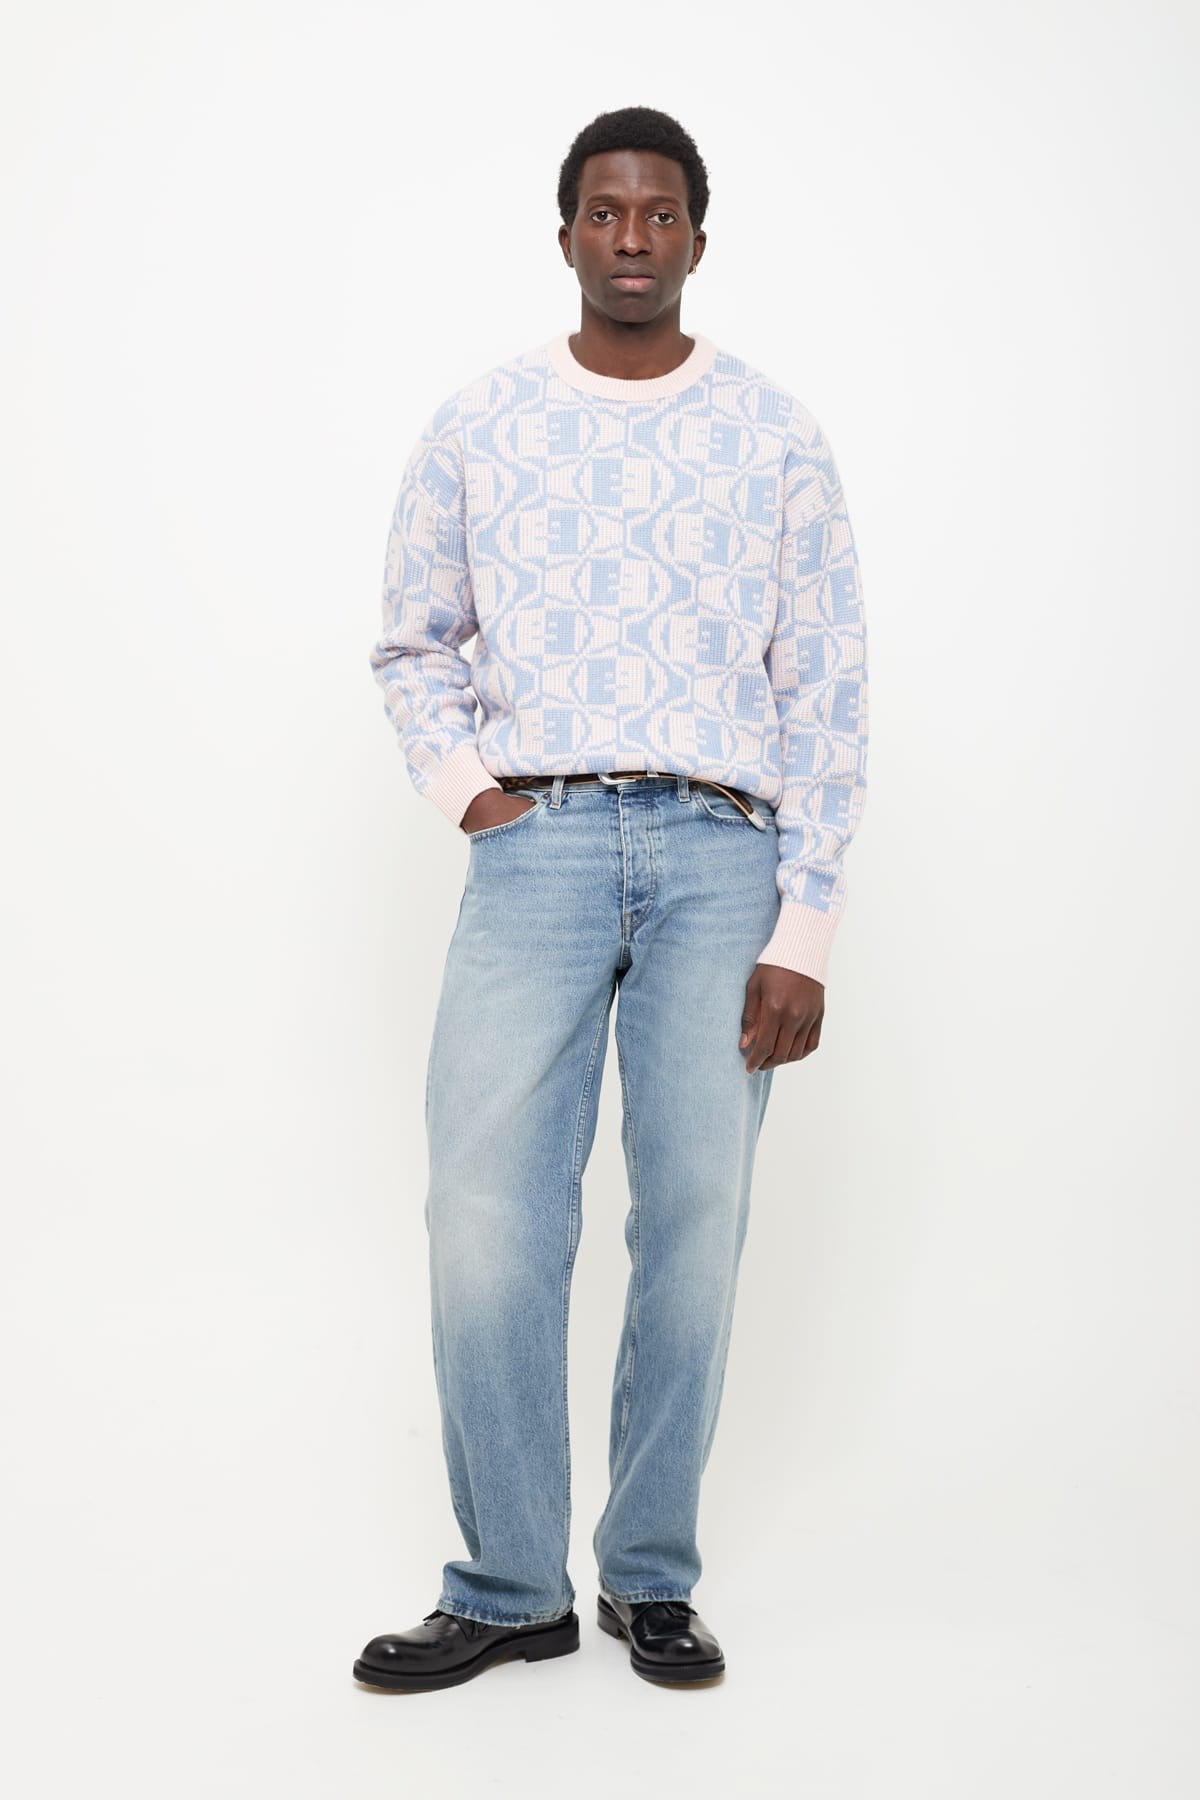 ACNE STUDIOS FADED PINK BLUE FACE ALL OVER SWEATER IAMNUE